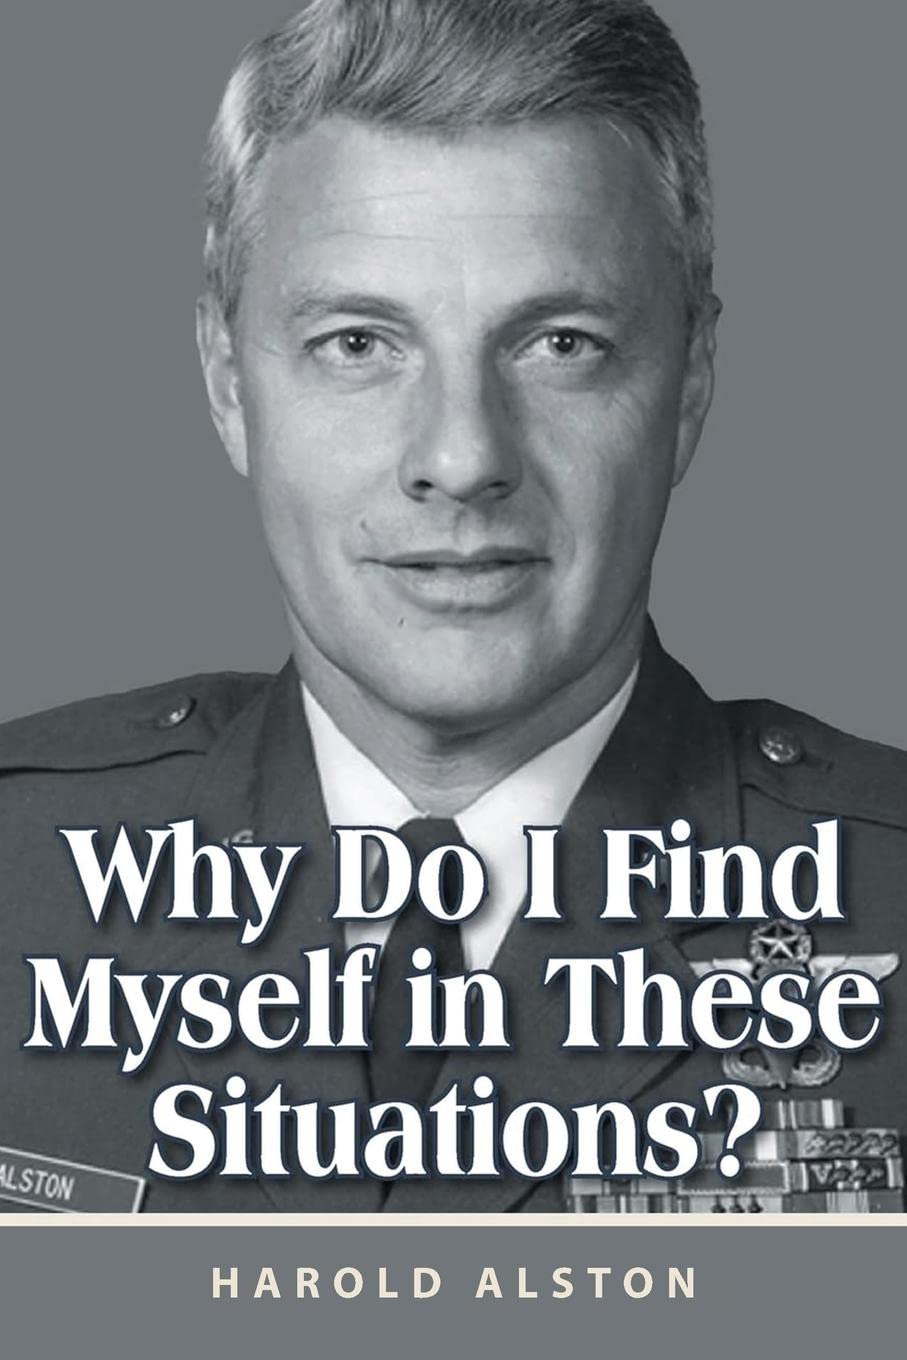 Why Do I Find Myself in These Situations? by Harold Alston